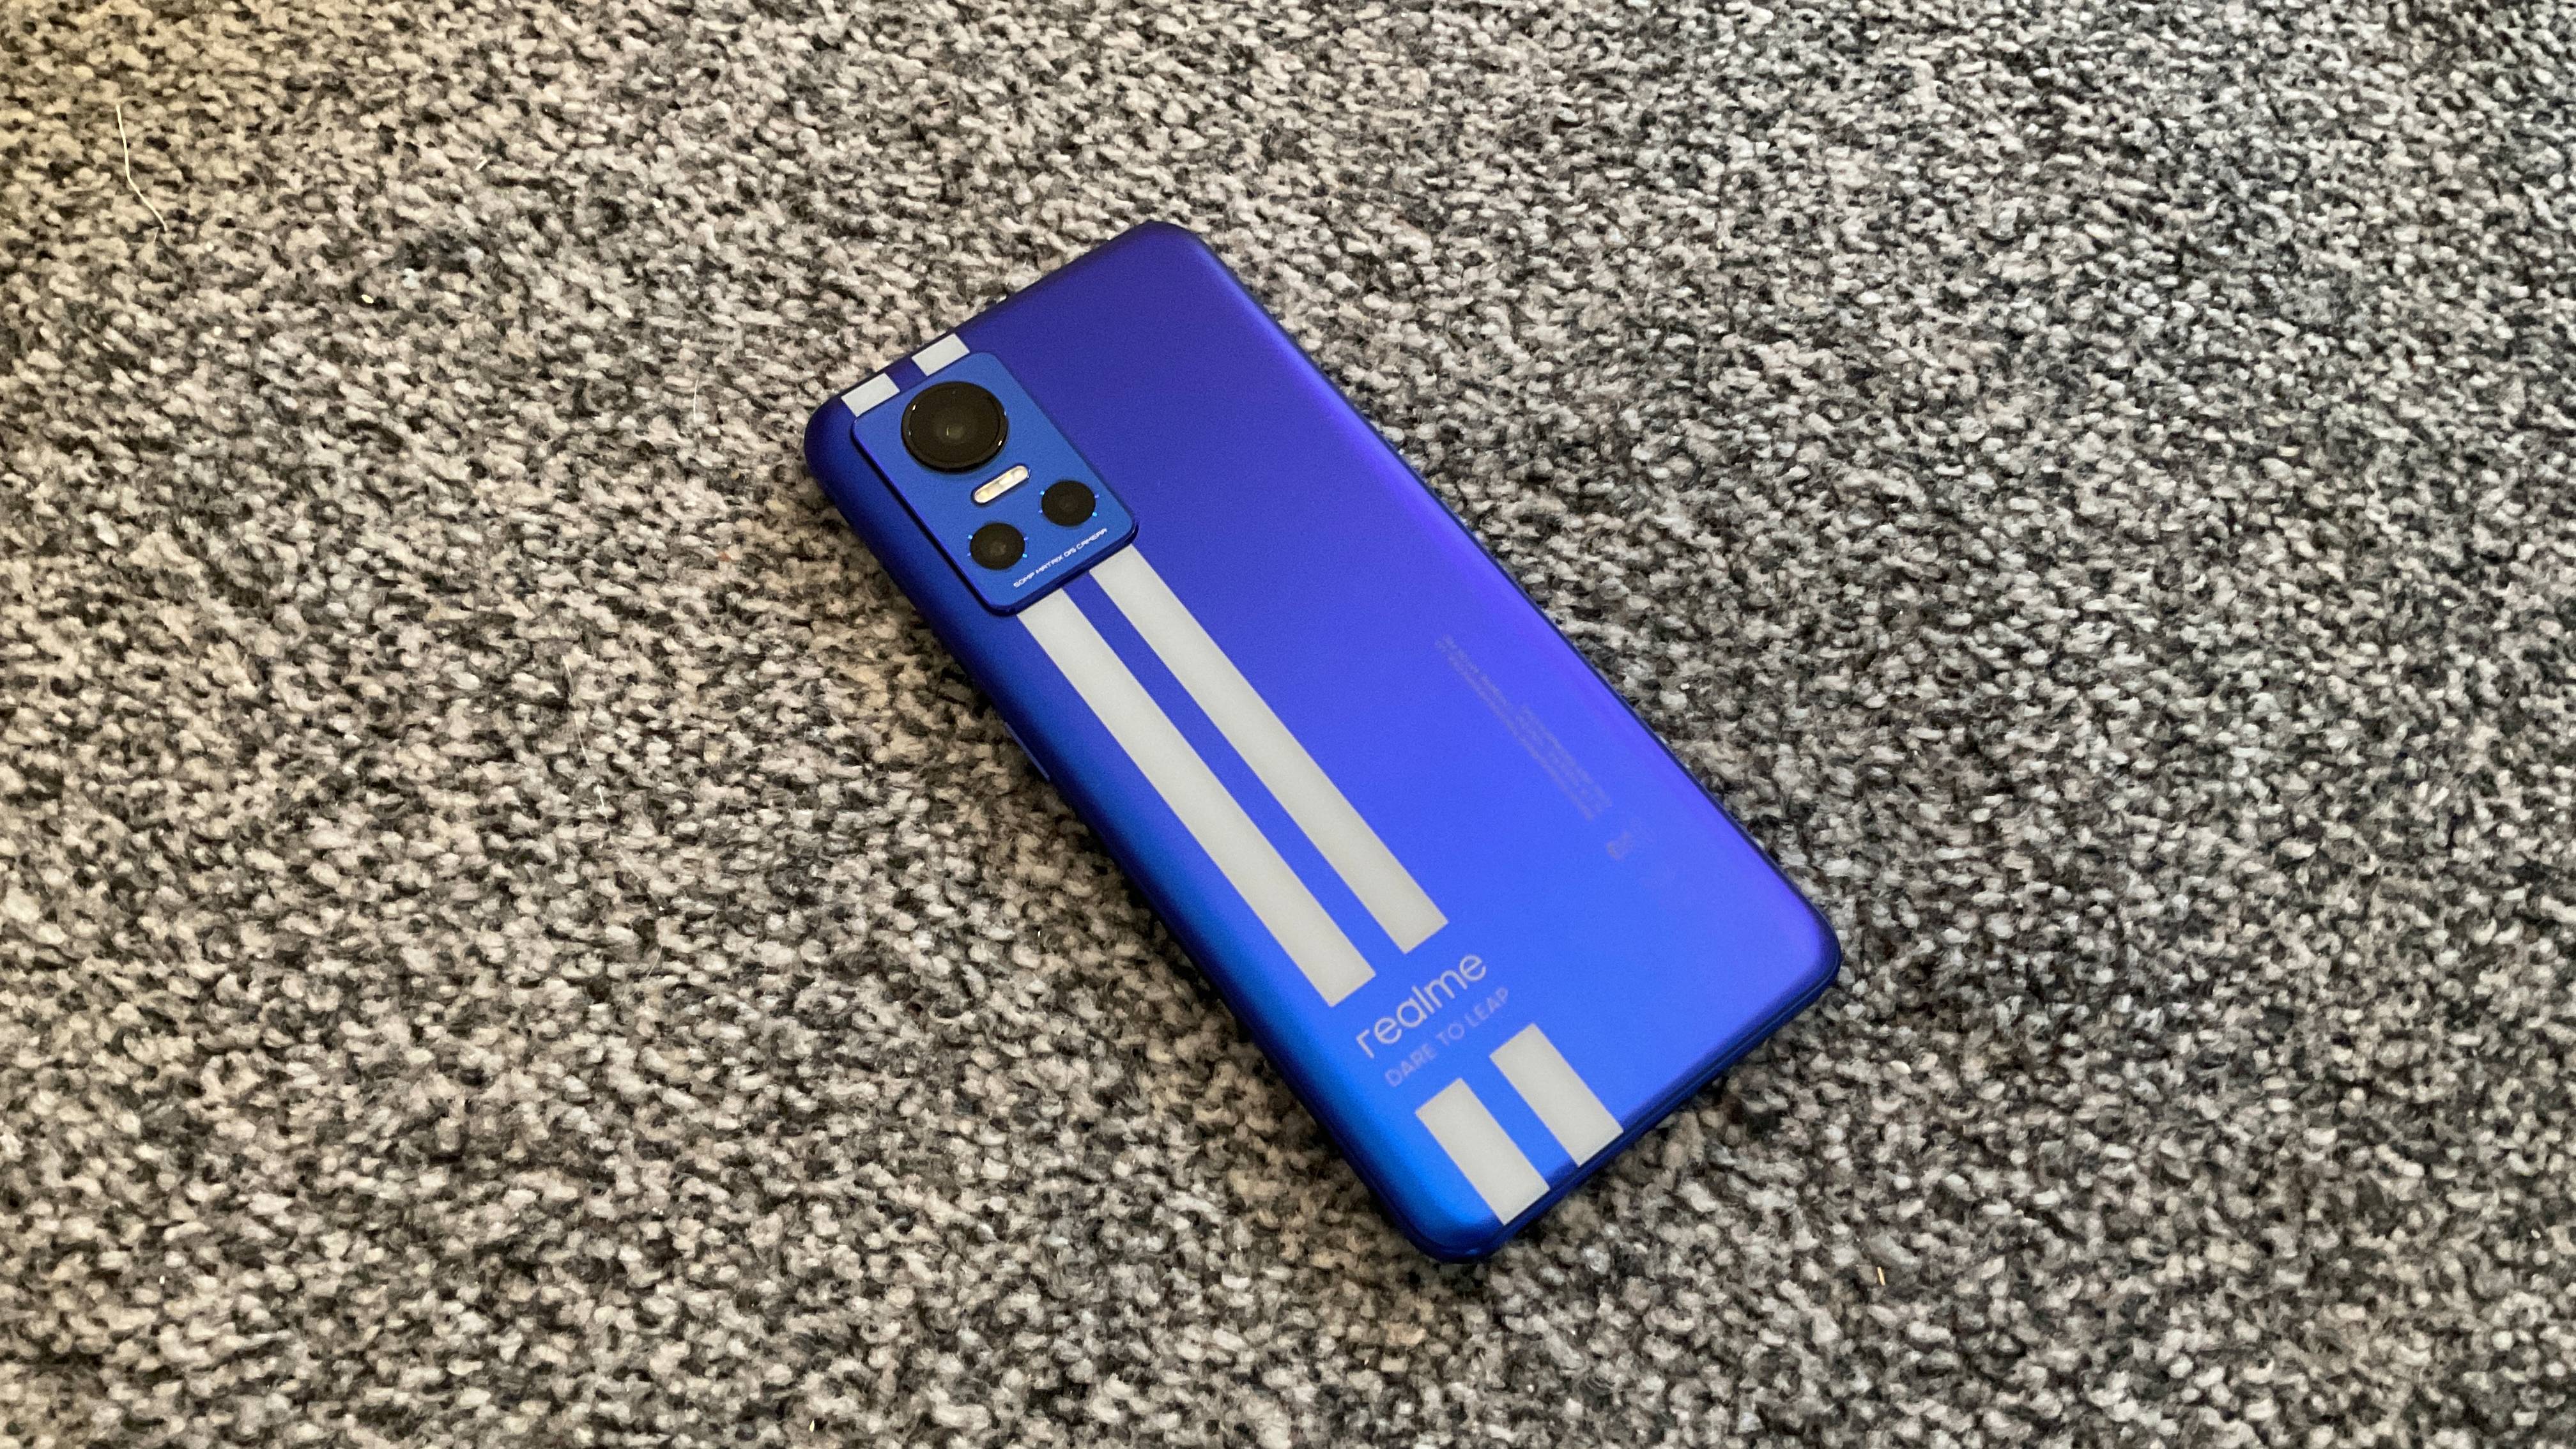 Realme GT Neo 3 150W review: Earning its stripes